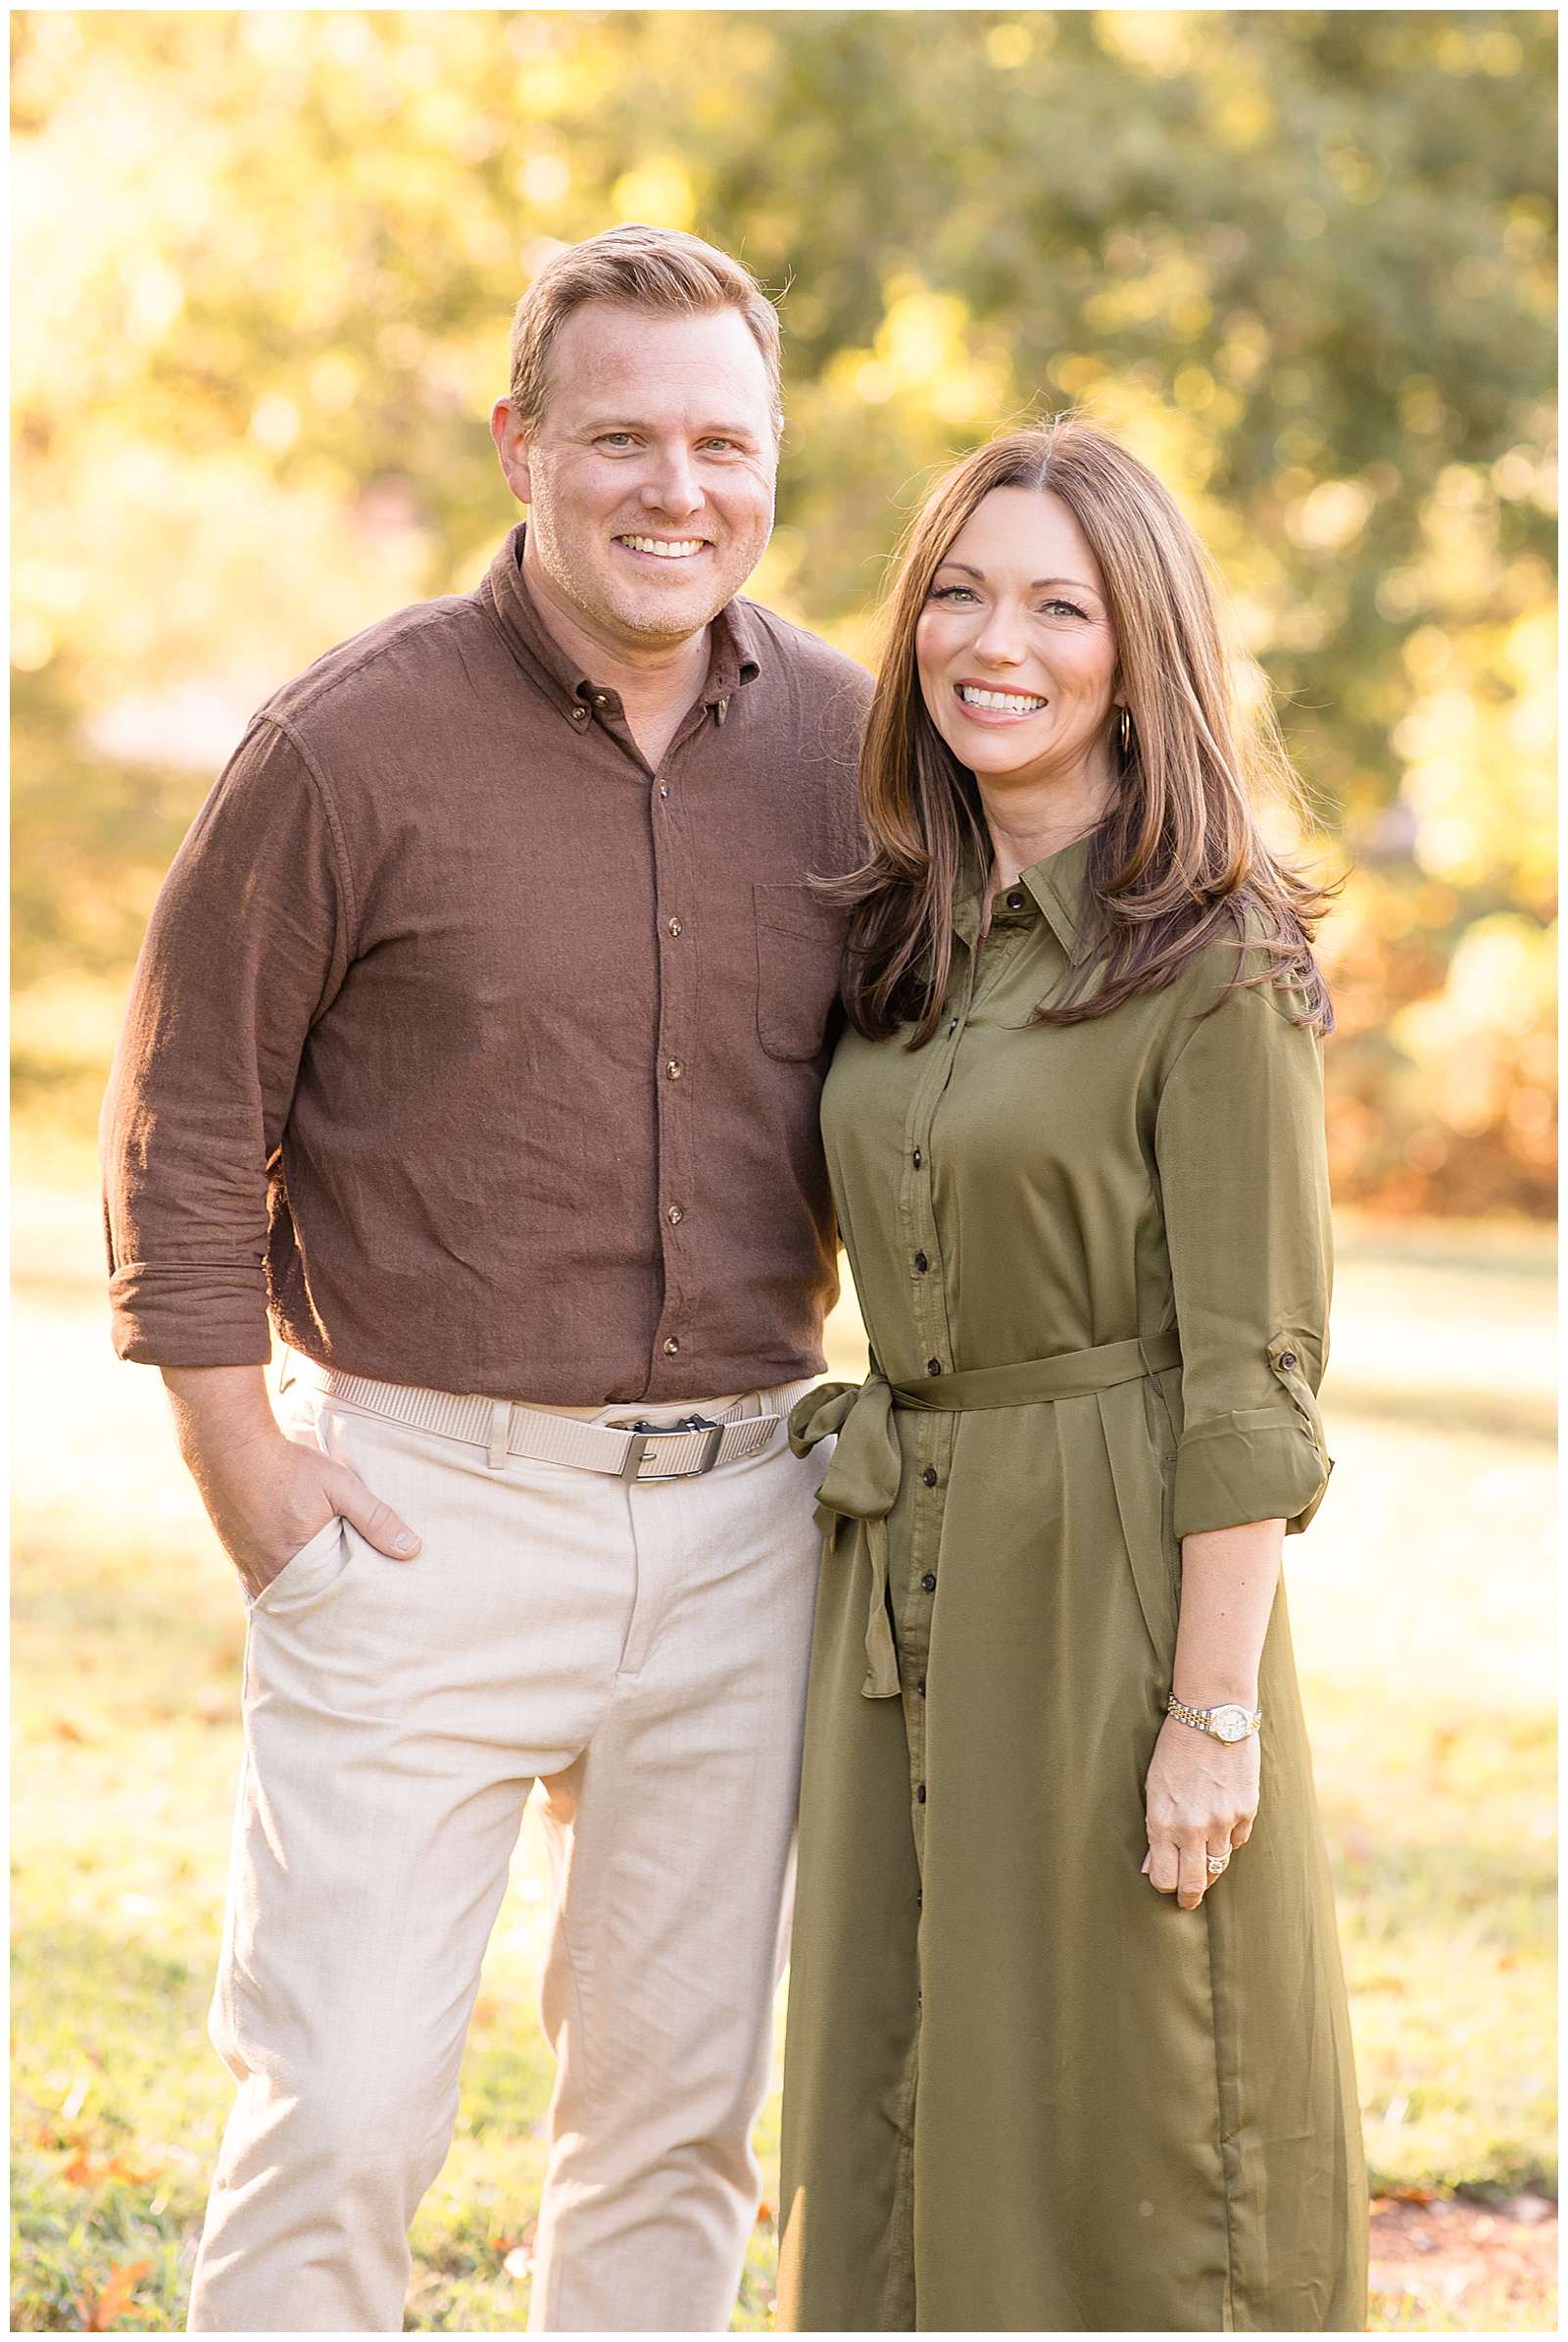 Rebecca Rice, family photography educator, takes a picture of parents with grown children by themselves during their fall family photography portraits.  Mom wears an olive green, button down dress and Dad wears khaki pants and a brown, long sleeve button down shirt.